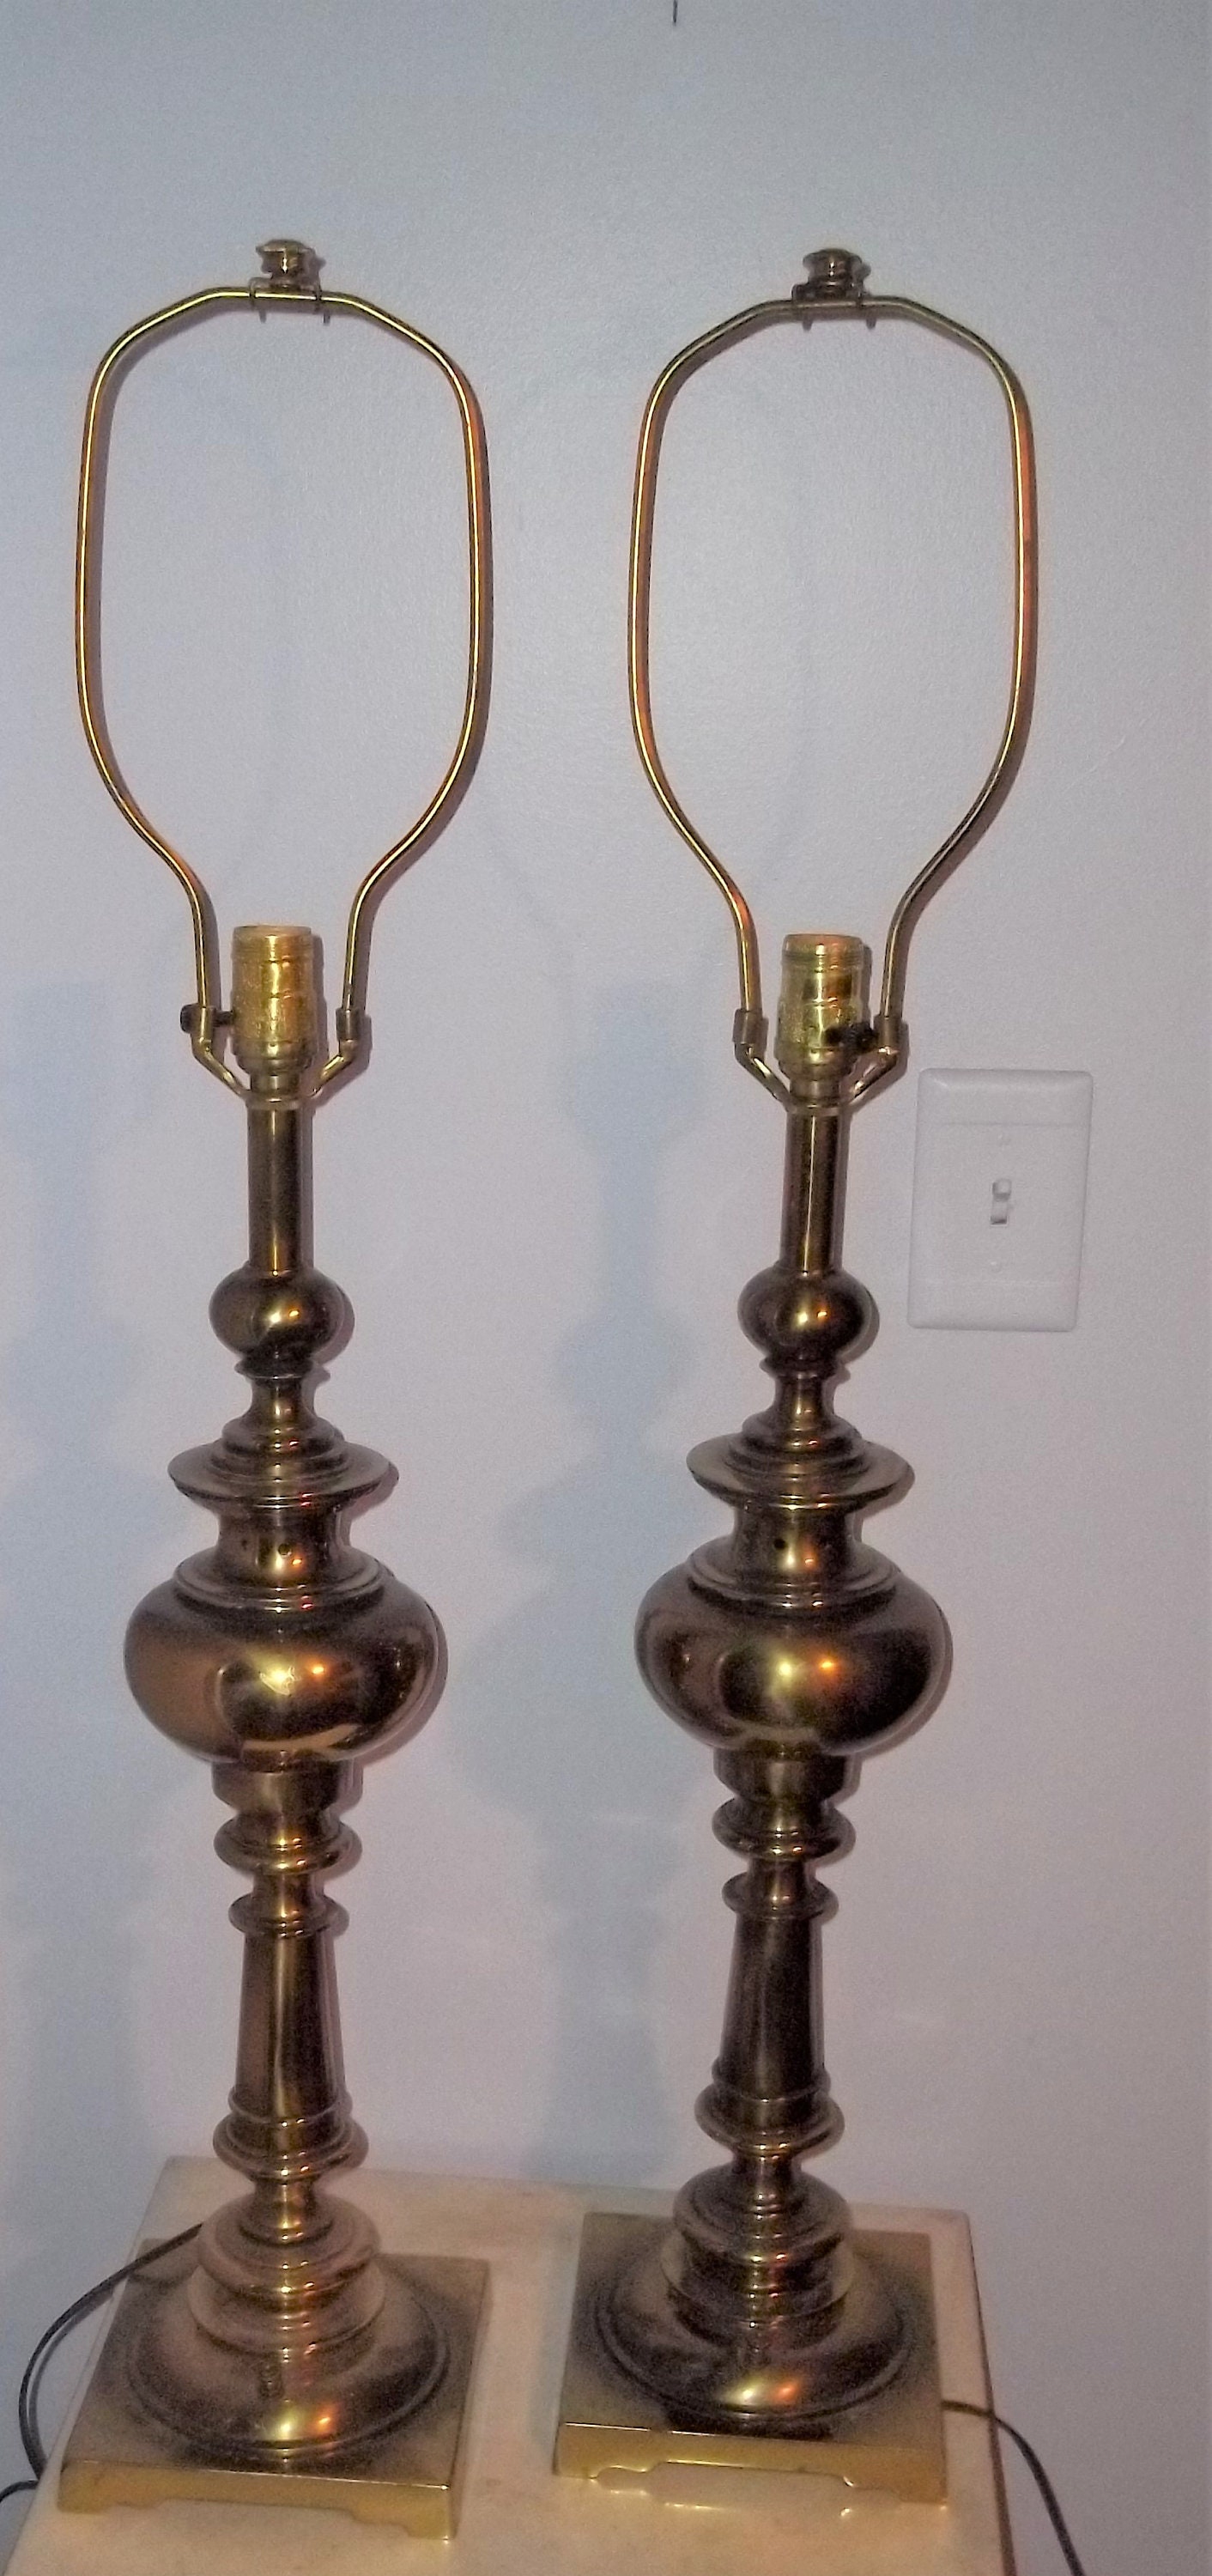 Vintage Brass Table Lamps by Stiffel, 1970s, Pair FREE DOMESTIC